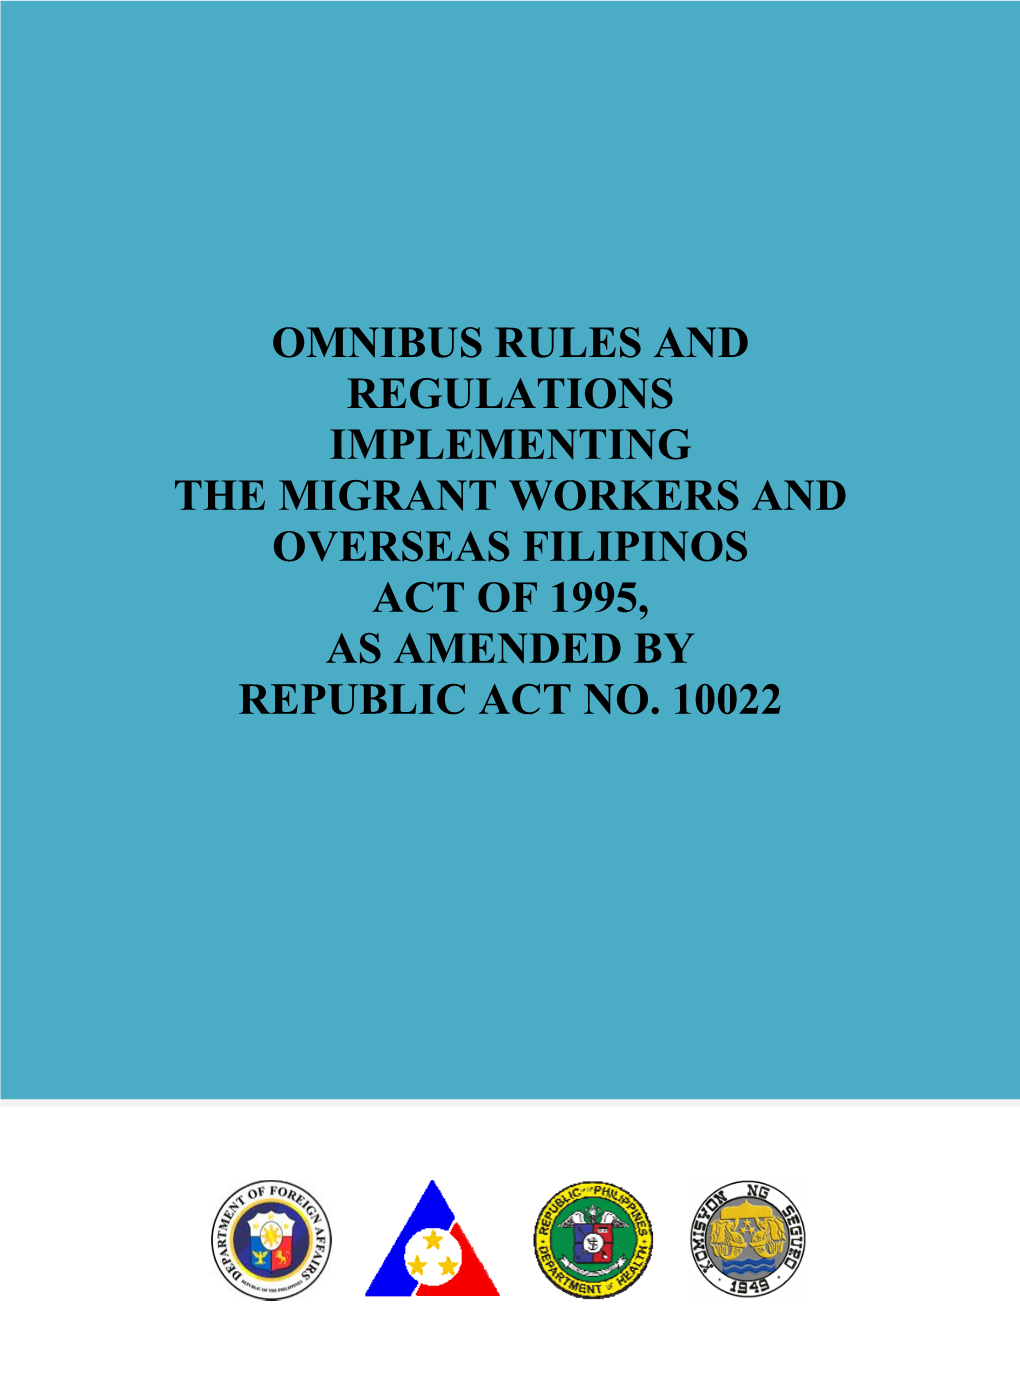 Omnibus Rules & Regulations Implementing the Migrant Workers